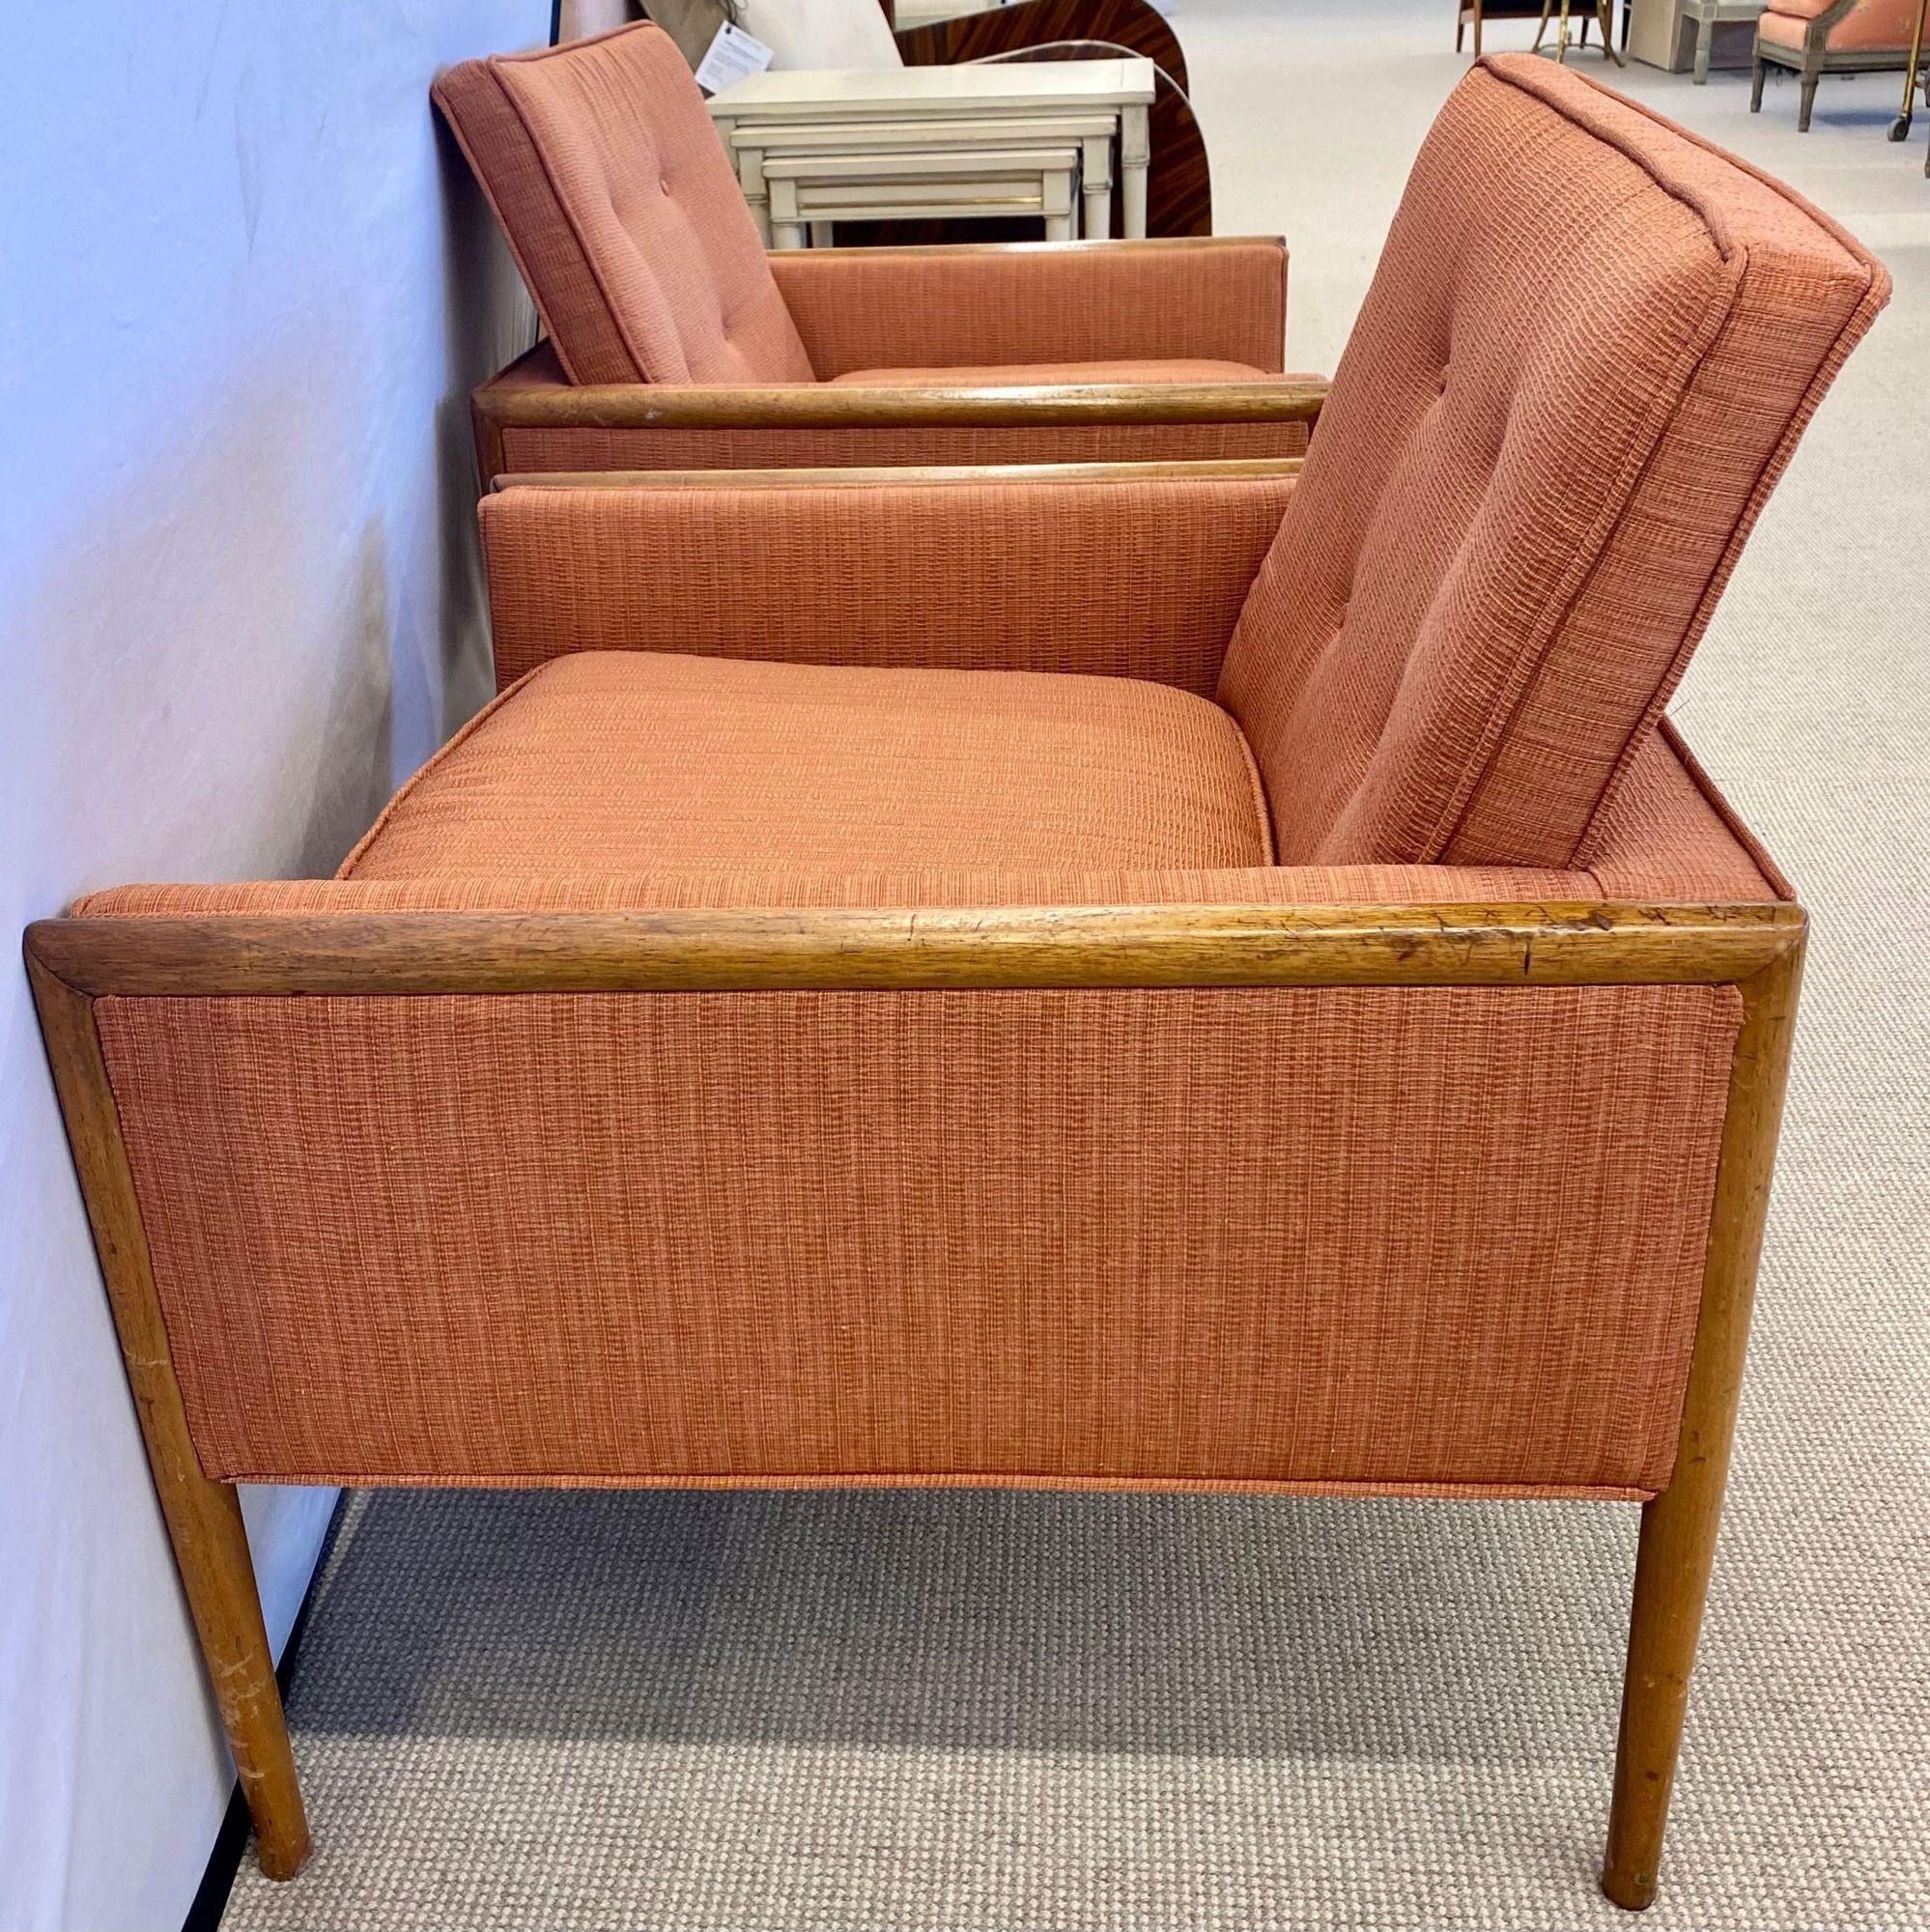 Pair of Mid-Century Modern Lounge Chairs, American, Walnut, 1960s For Sale 10